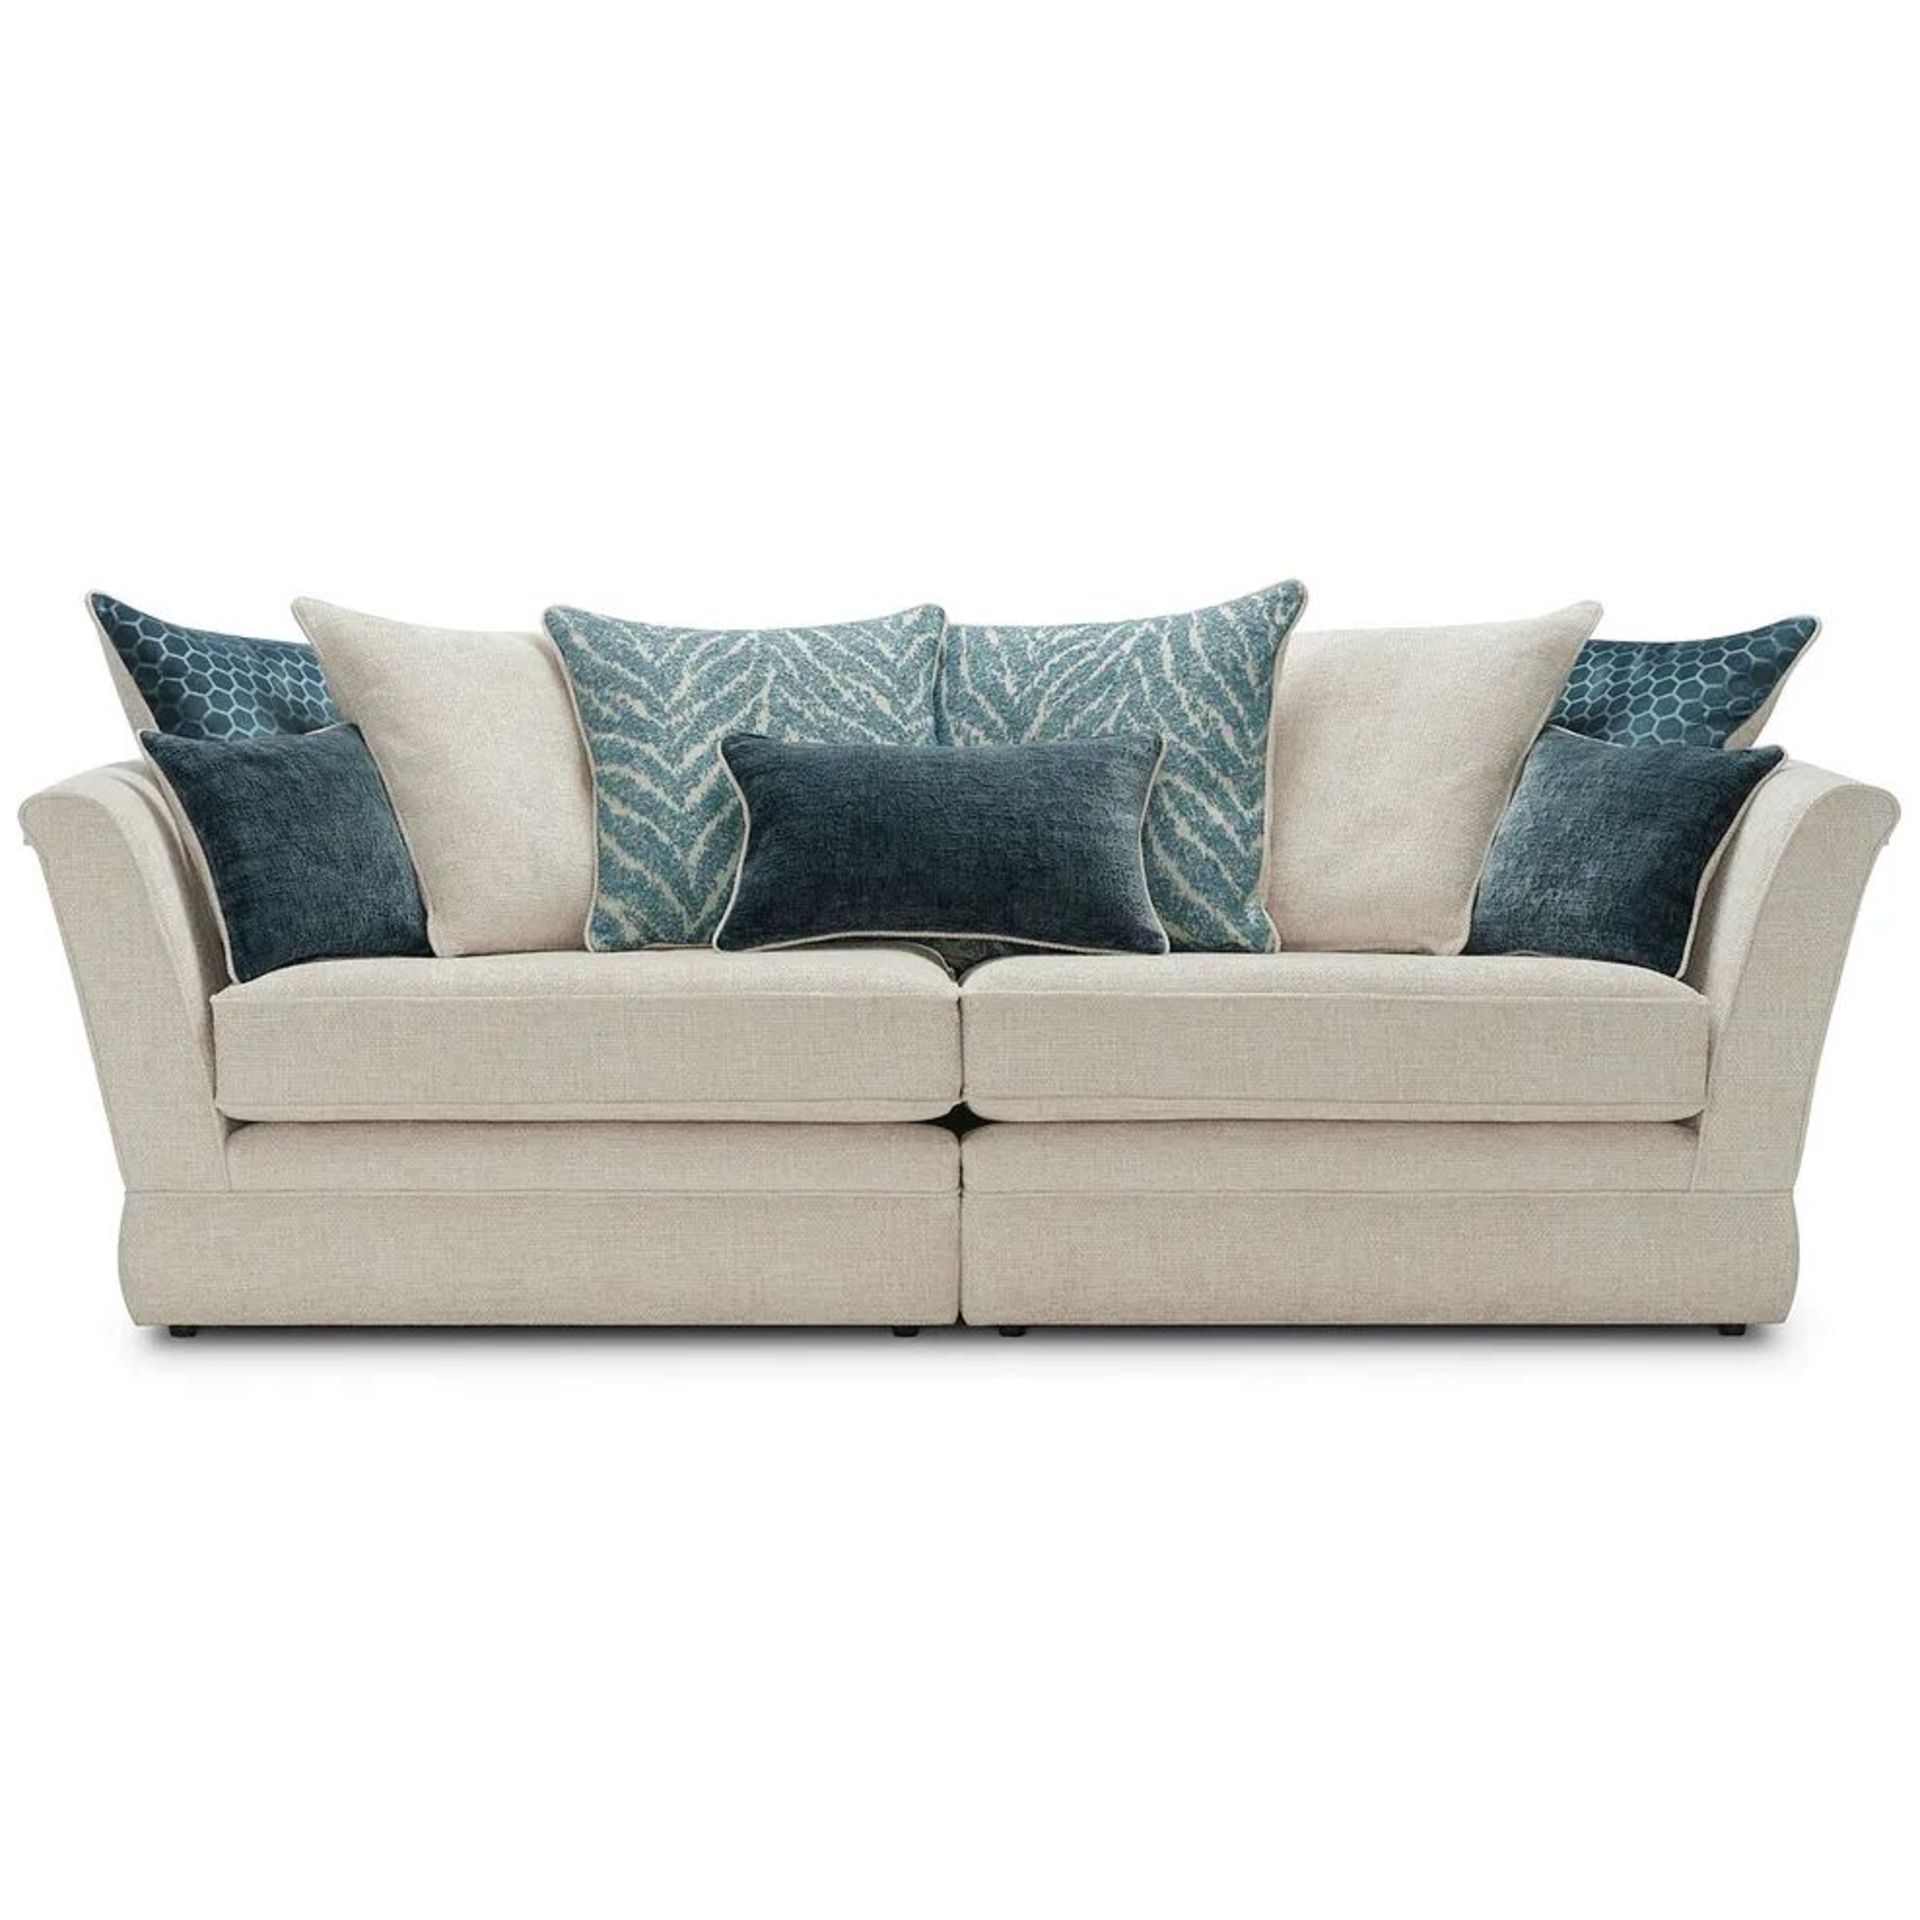 BRAND NEW CARRINGTON 4 Seater Pillow Back Split Sofa - NATURAL FABRIC. RRP £1149. Bring a modern - Image 2 of 8